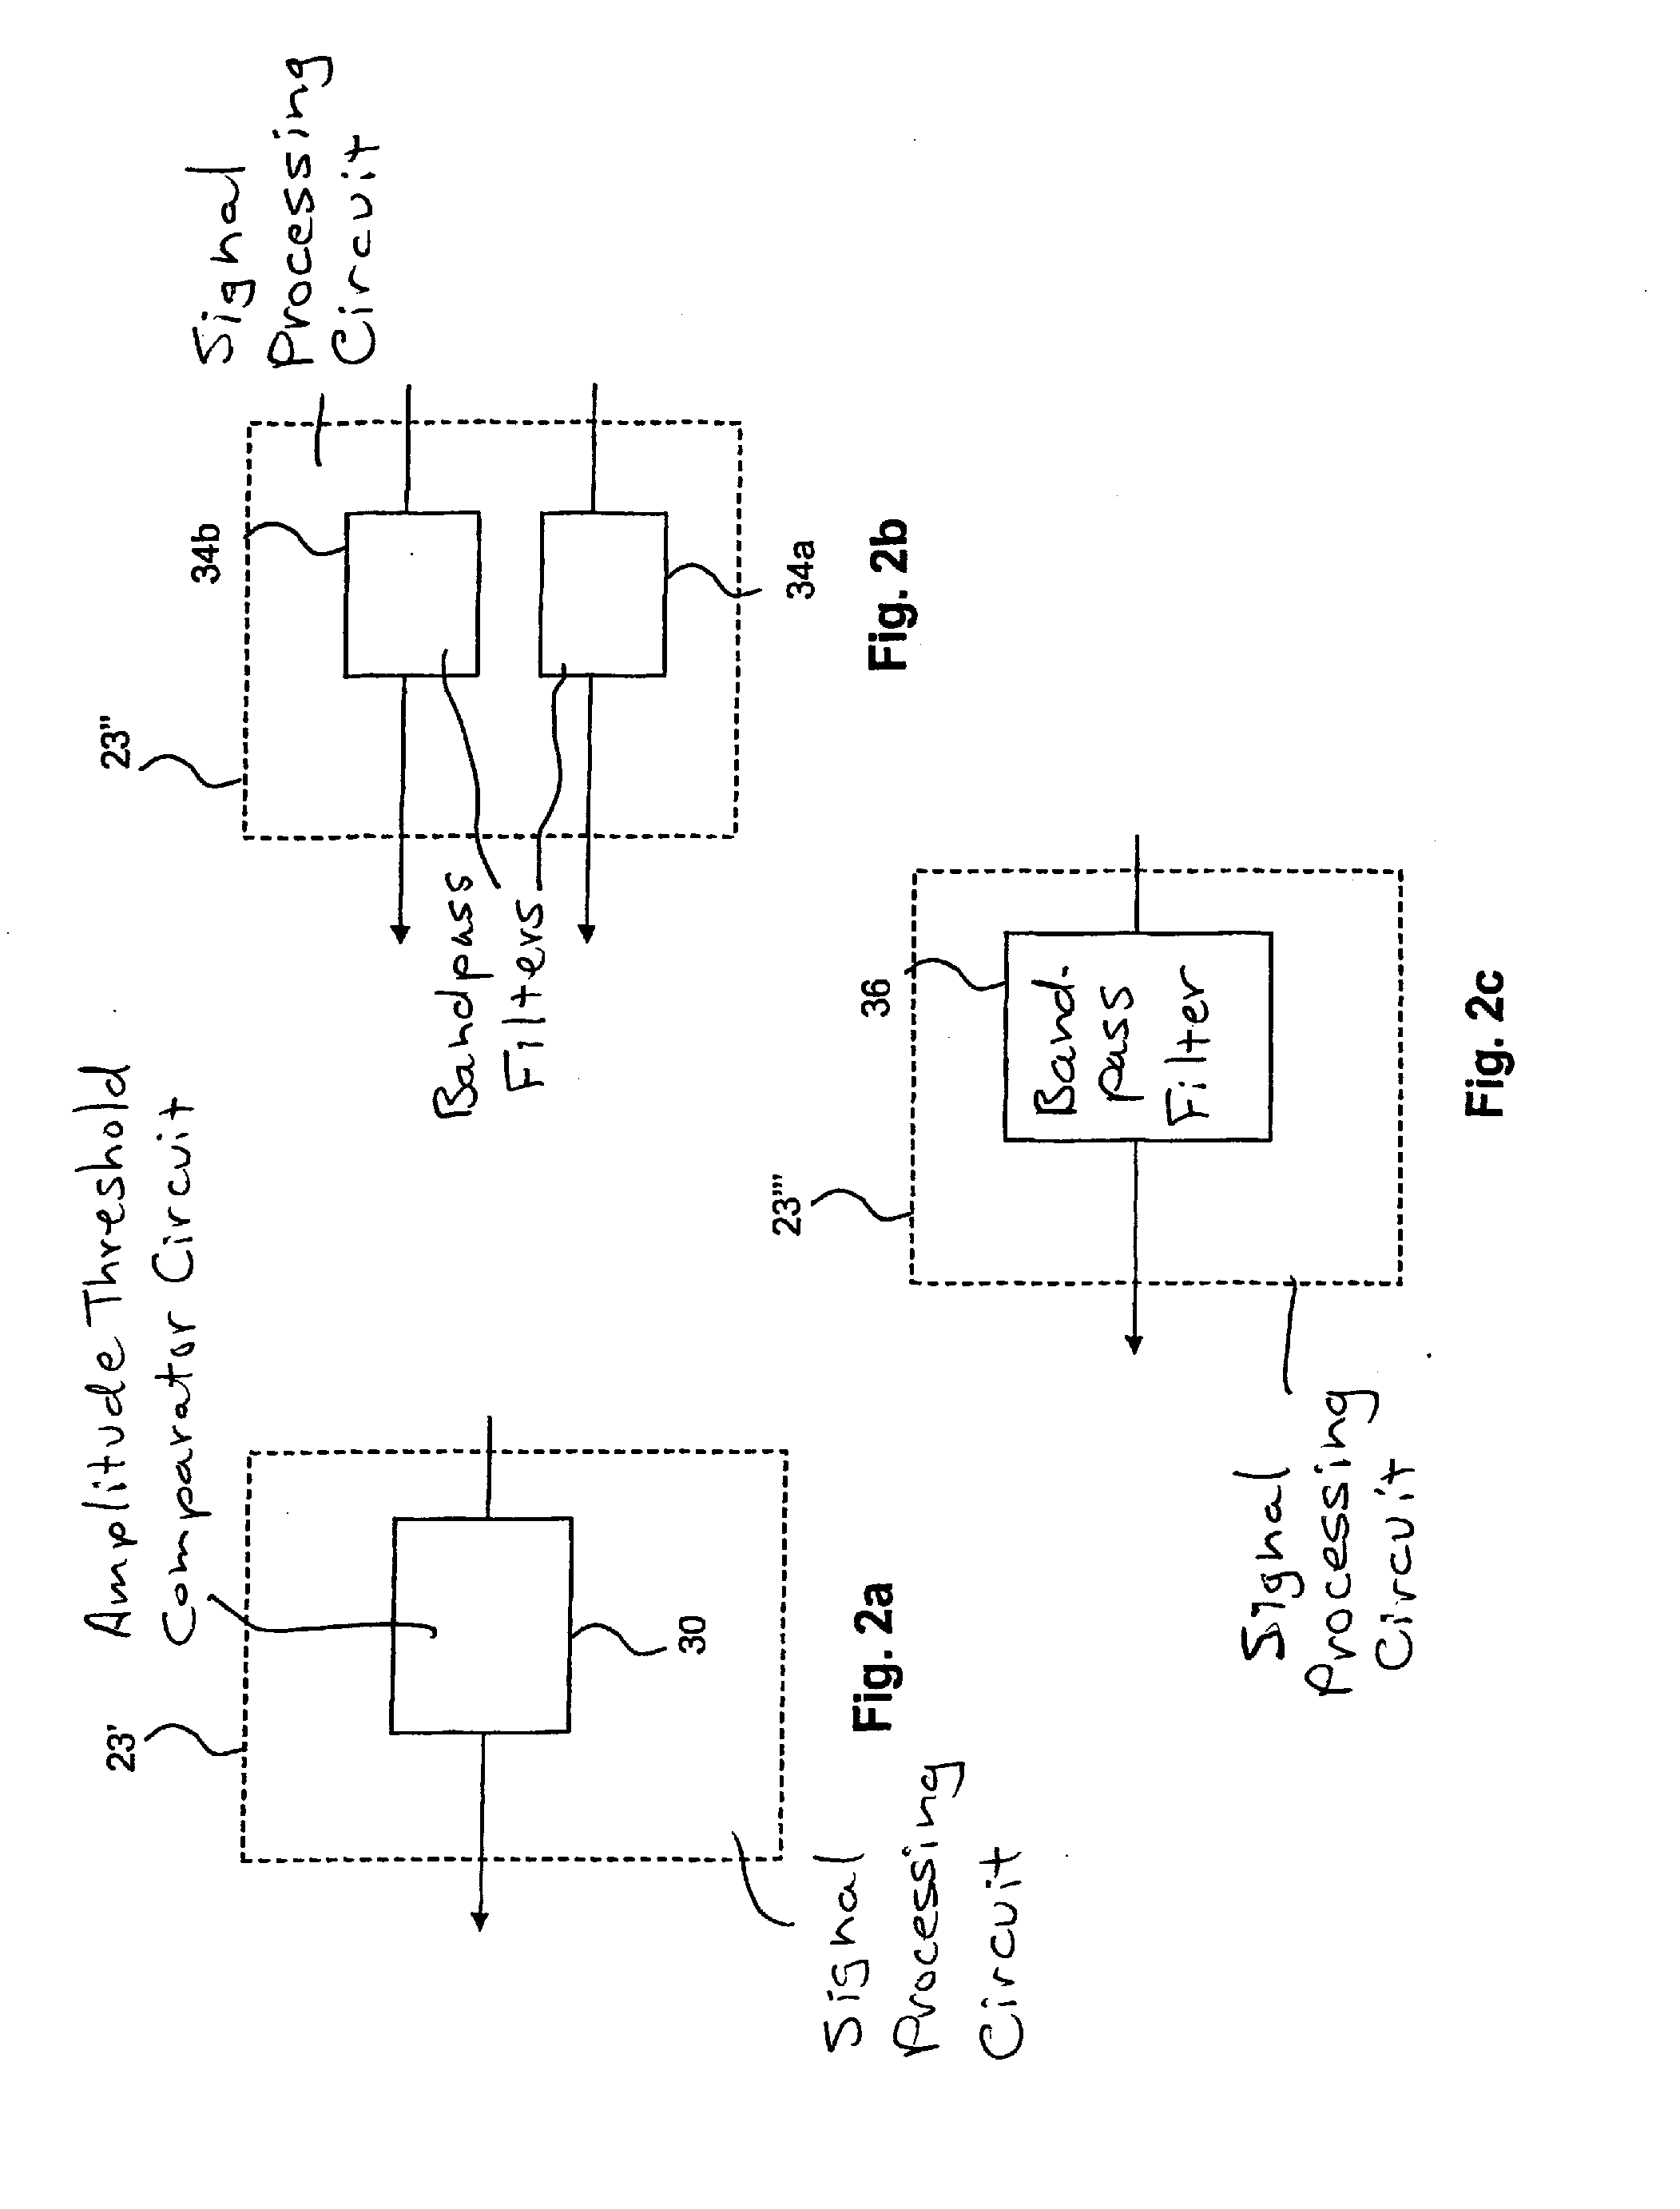 Implantable medical device with optimization procedure